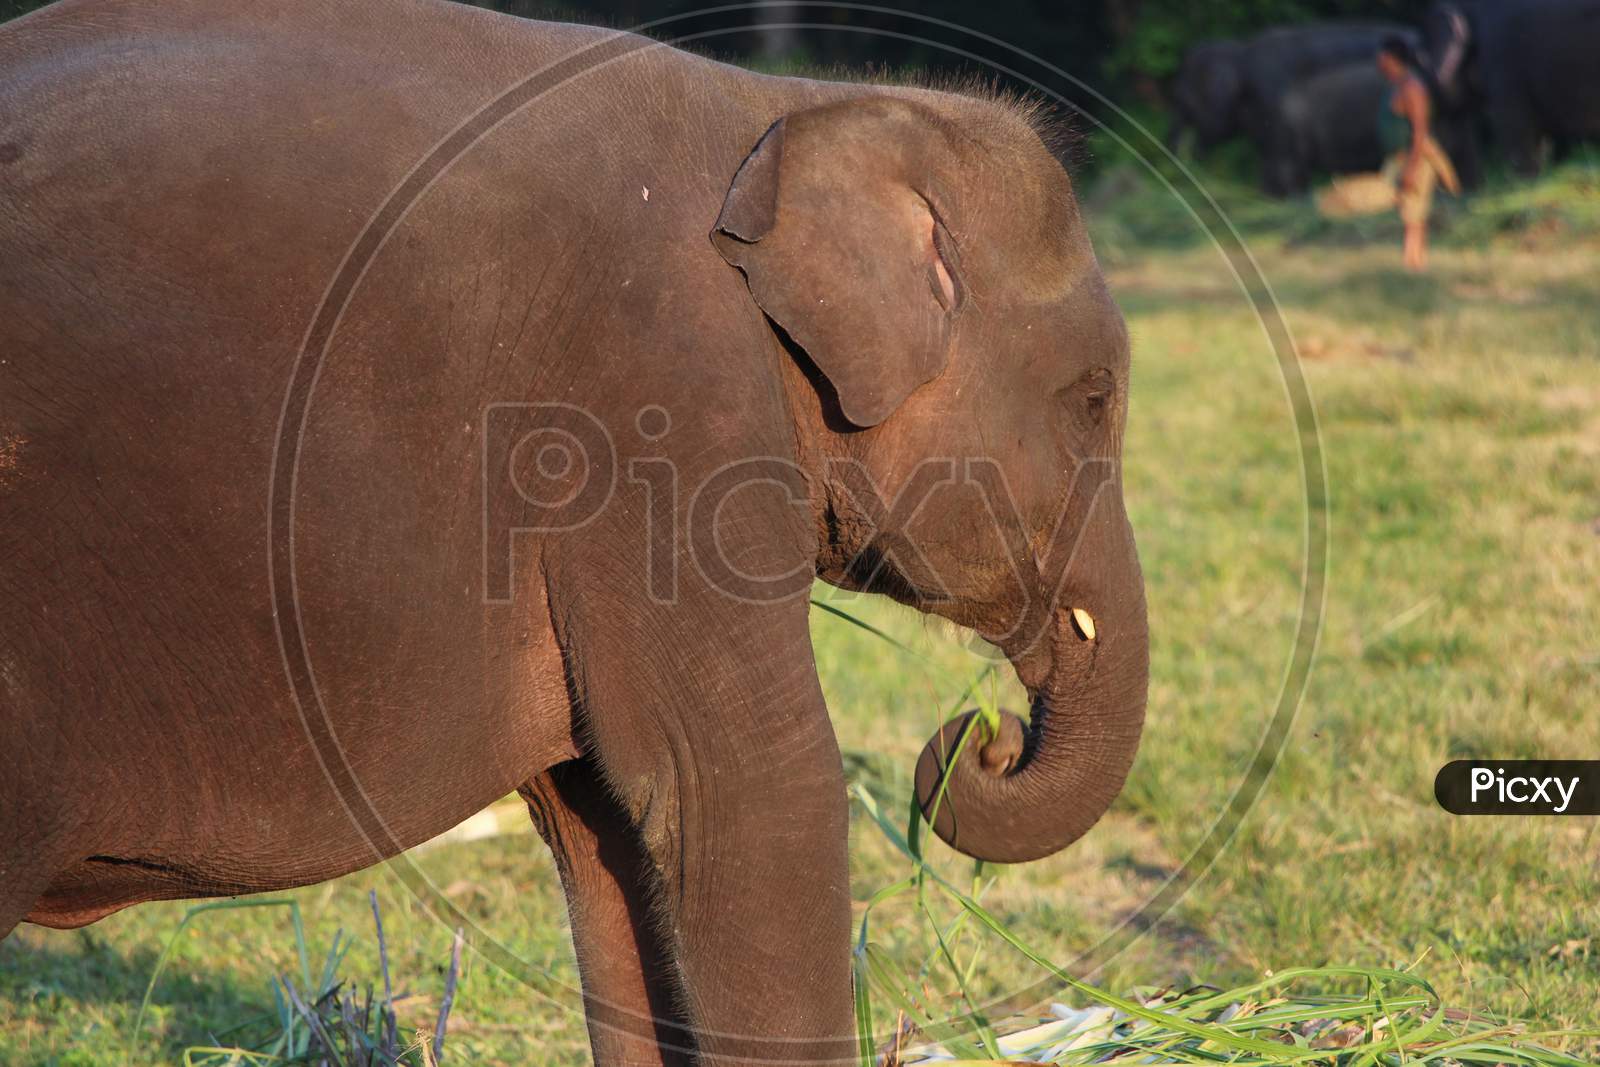 An Elephant eating grass in a Zoo